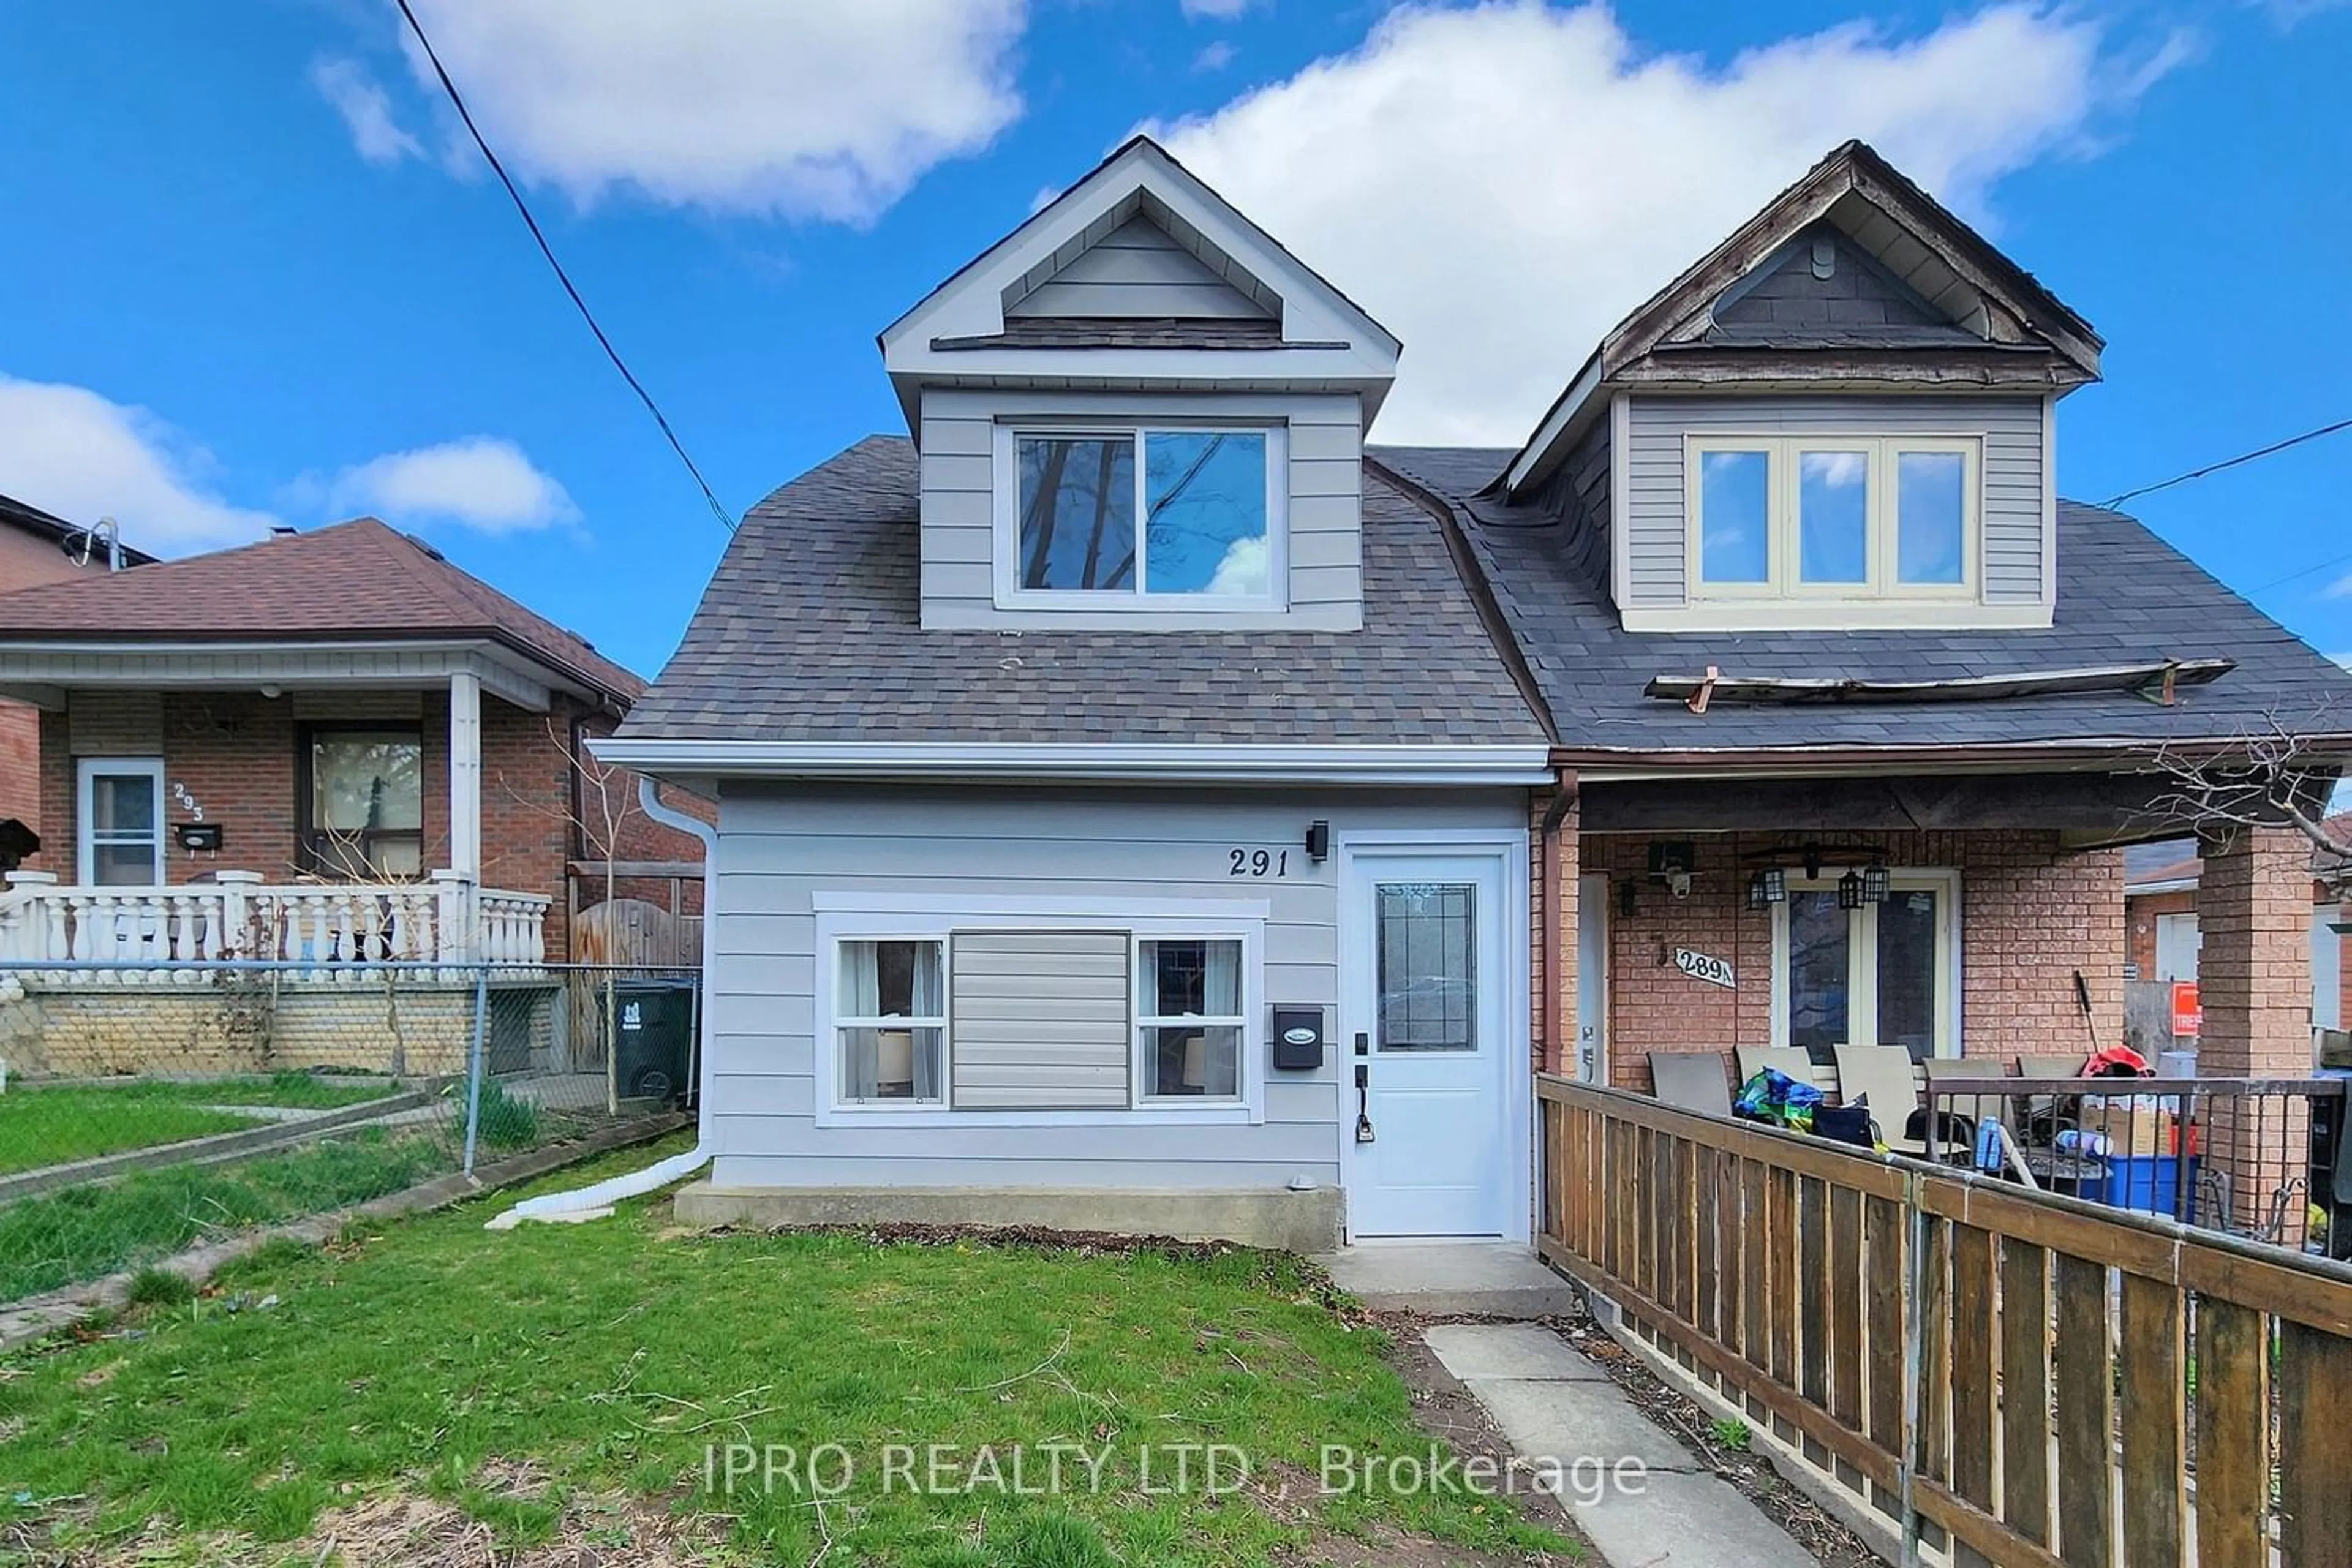 Frontside or backside of a home for 291 Harvie Ave, Toronto Ontario M6E 4L2